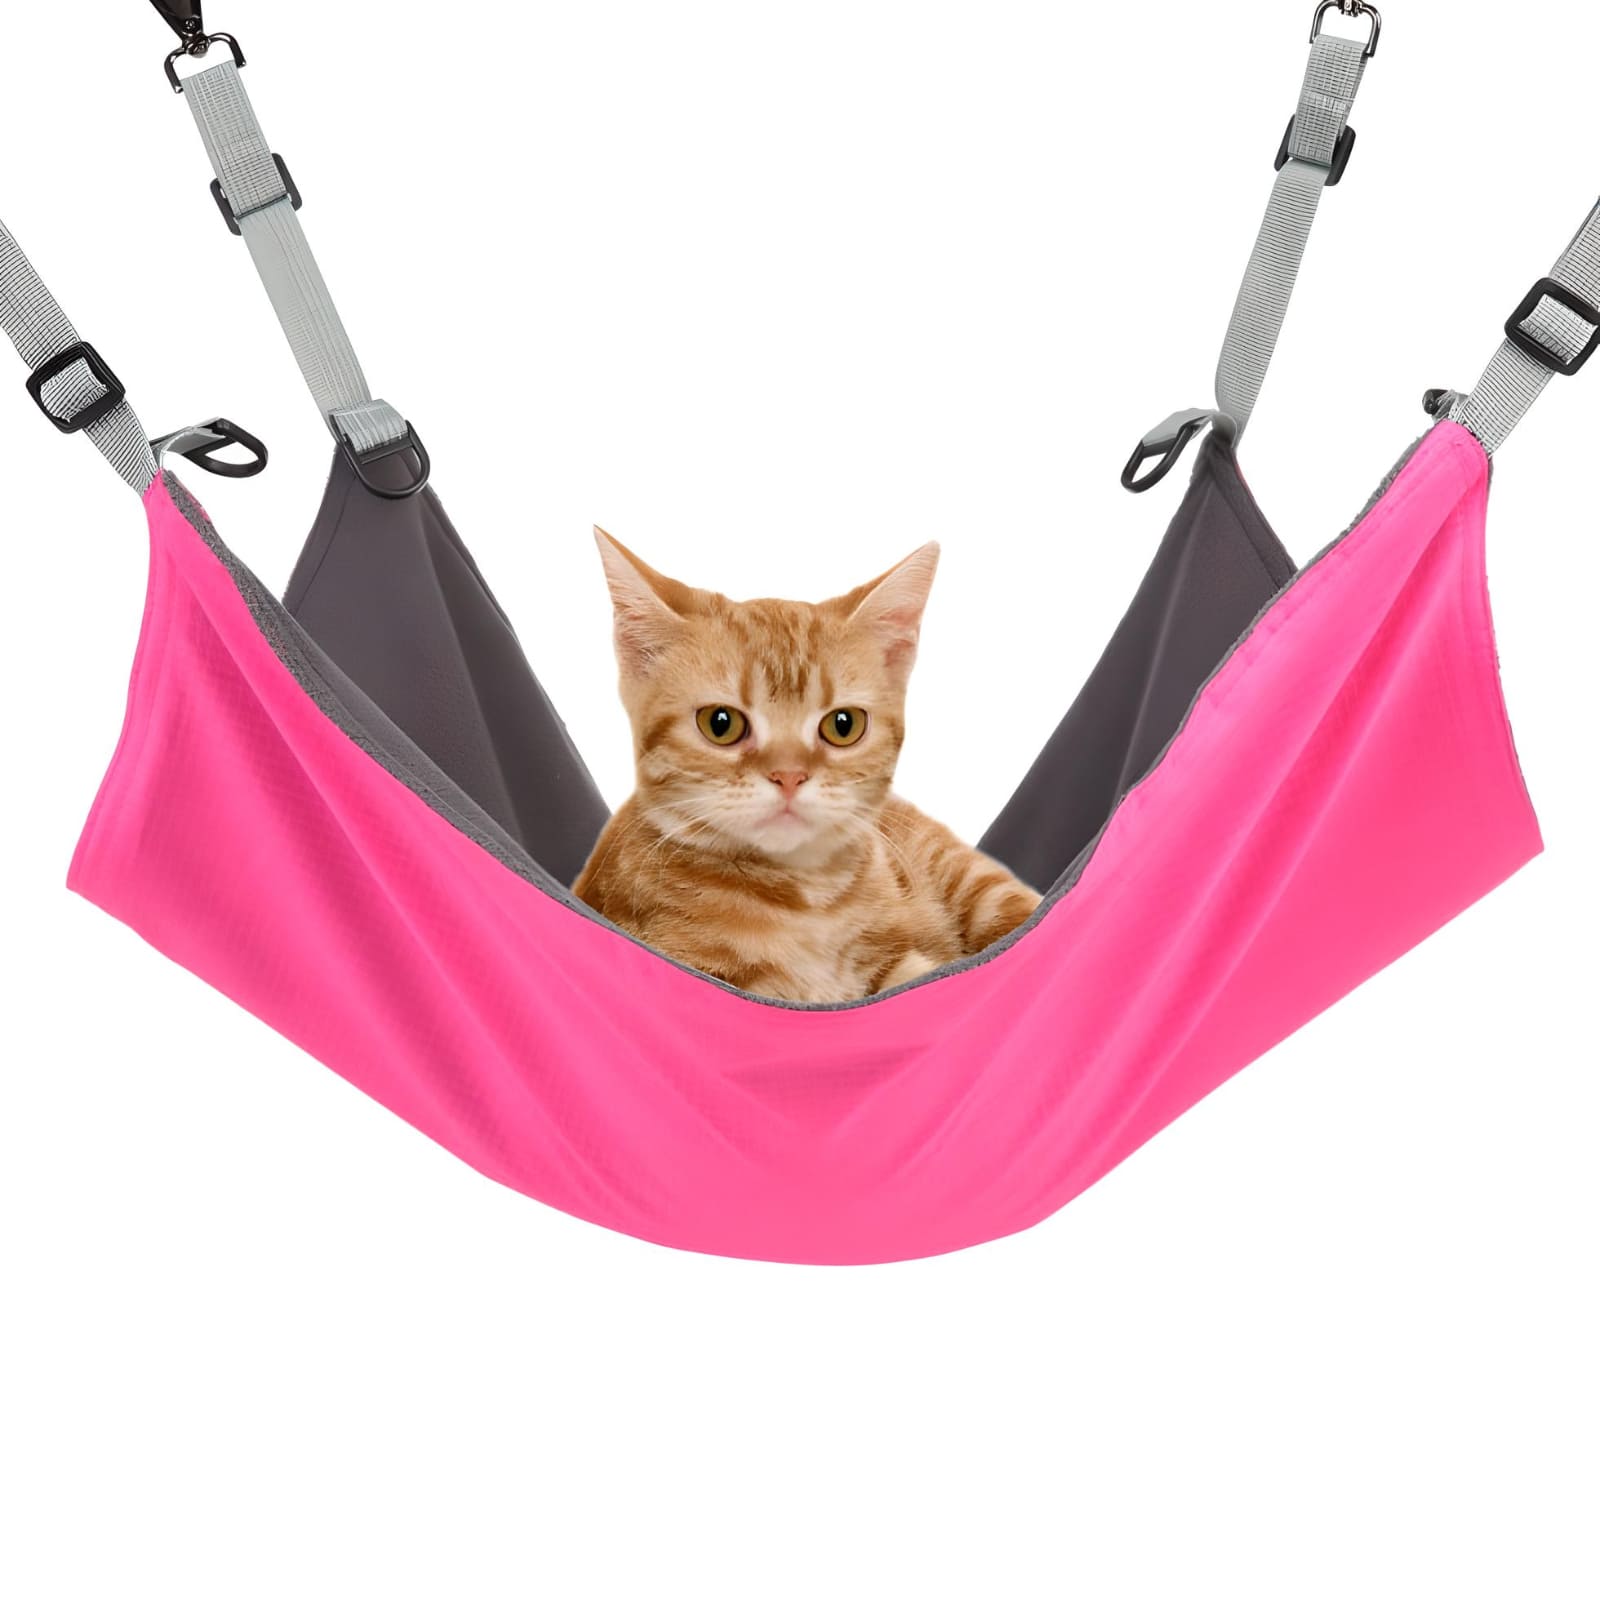 Copy-of-cat-in-a-pink-hanging-pet-bed